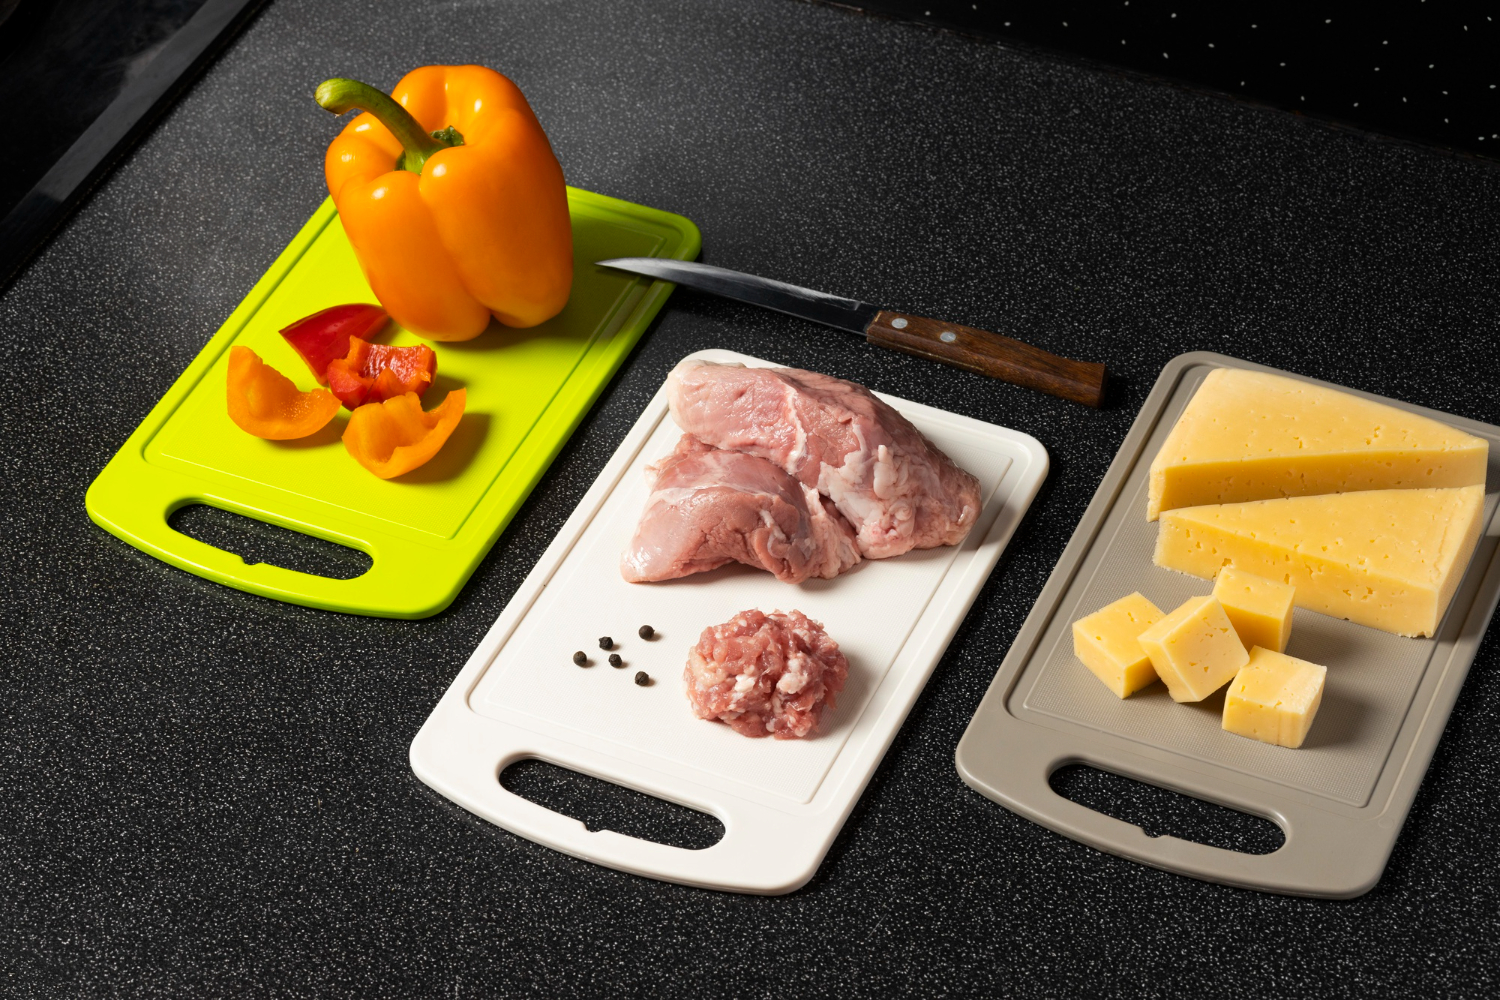 Sliced orange bell peppers, raw chicken, and cubed cheese each on a different cutting board to prevent cross-contamination. The cutting boards are green, white, and brown, and sit on a black countertop.